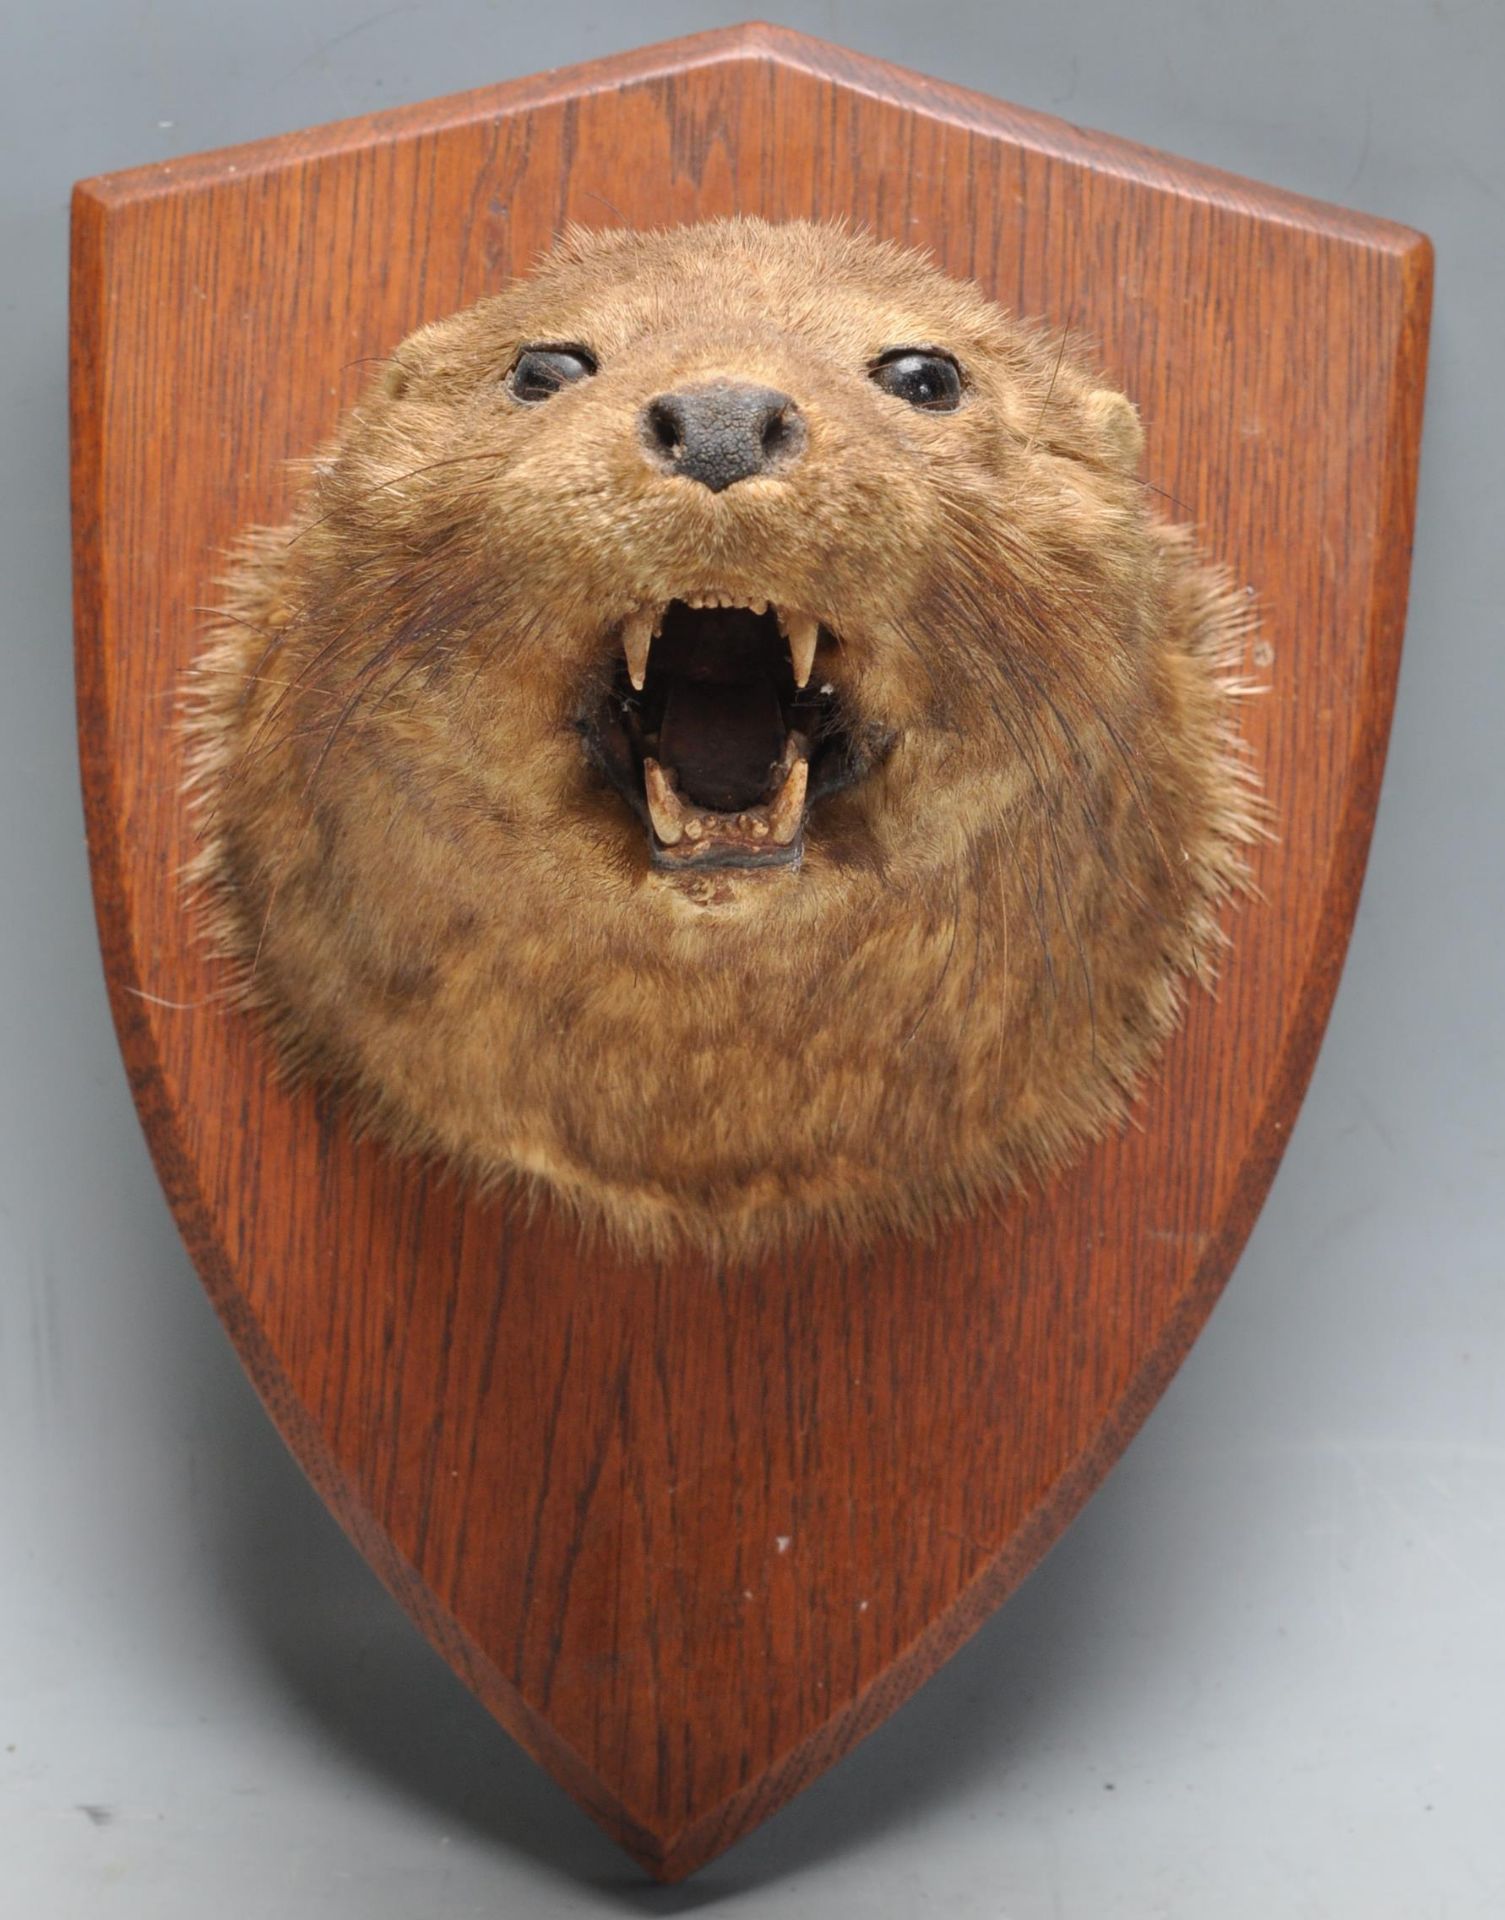 OF TAXIDERMY INTEREST - LATE 20TH CENTURY TAXIDERMY OTTERS HEAD